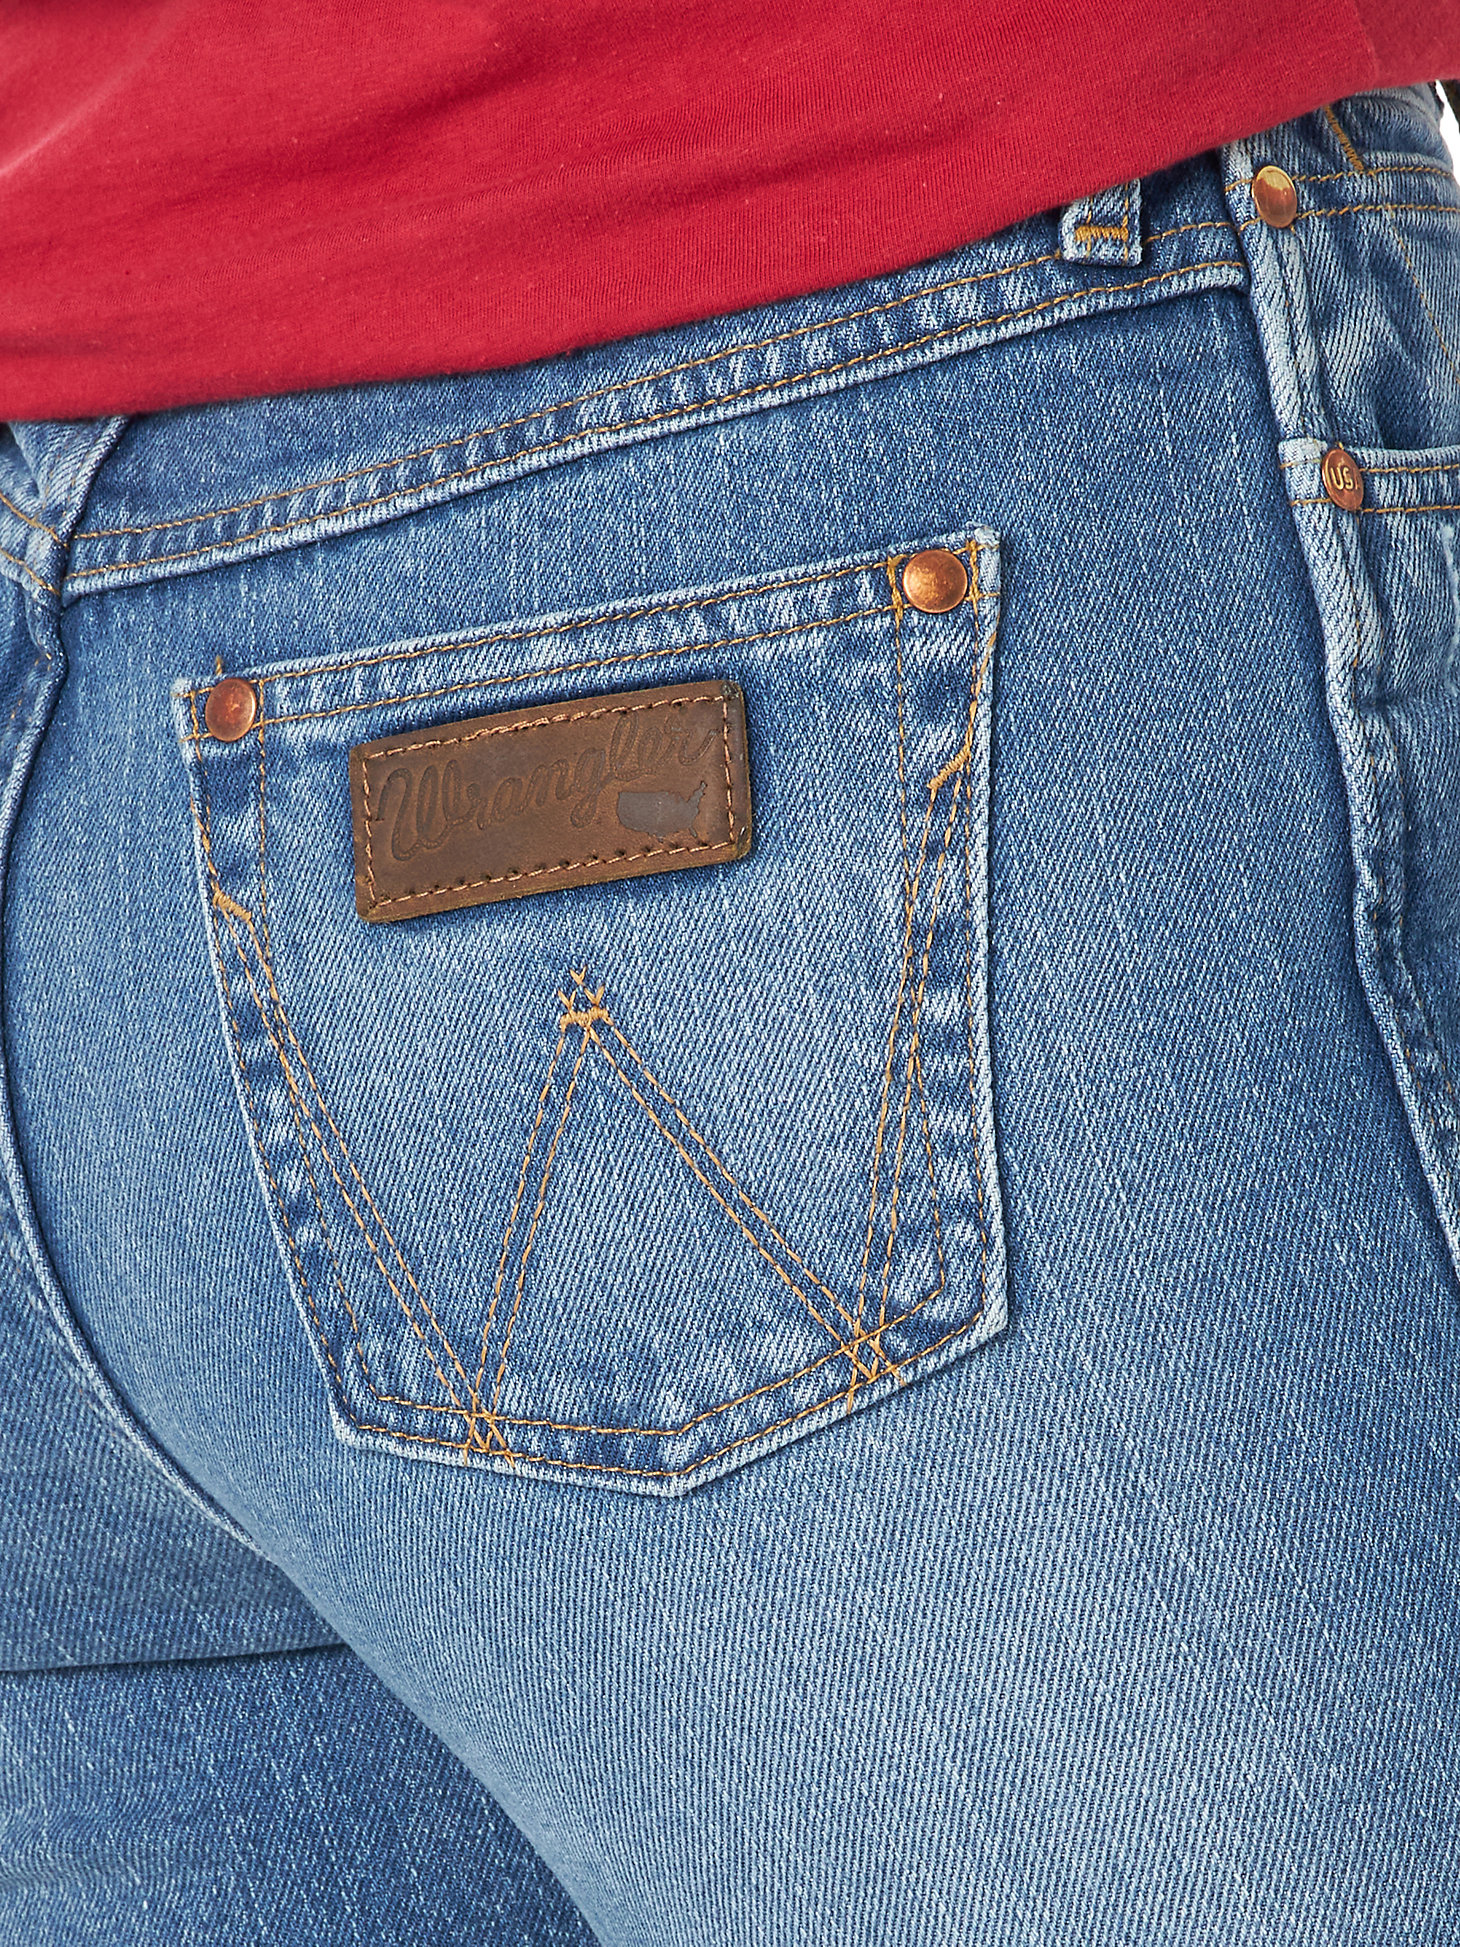 Women's Wrangler Rooted Collection™ USA High Rise Straight Leg Jean in Blue alternative view 7